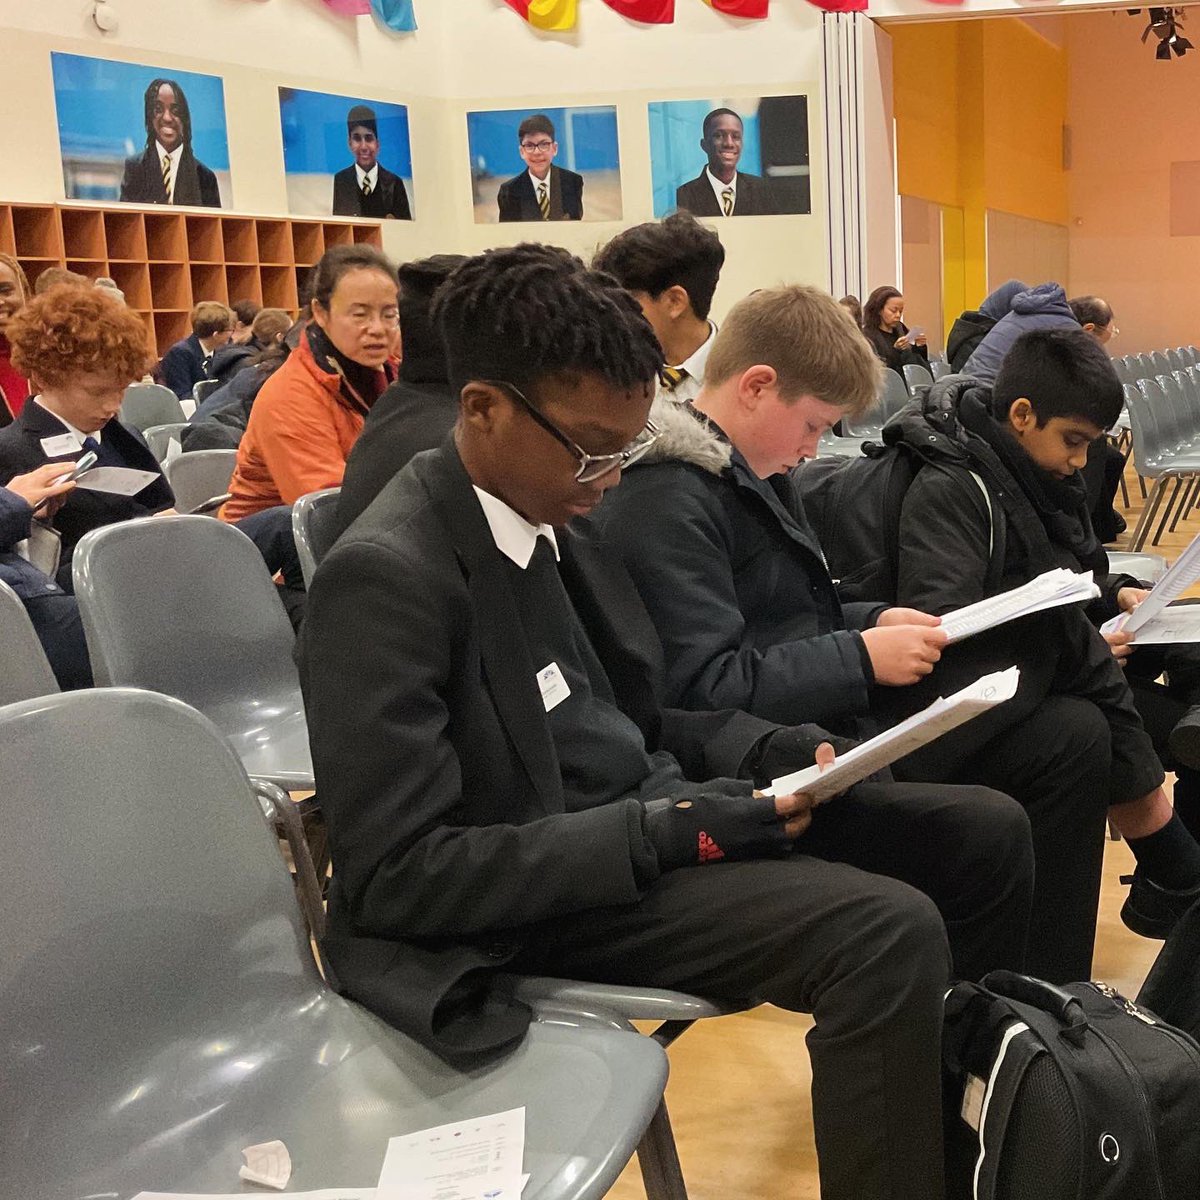 Yesterday, three of our year 7s – Owen, Sharvan and Jayden – travelled to East London to the Rokeby School with Madame Saunders to compete in the regional finals of the Foreign Language Spelling Bee 2024.
#stolavesgrammarschool #modernforeignlanguages #spellingbee